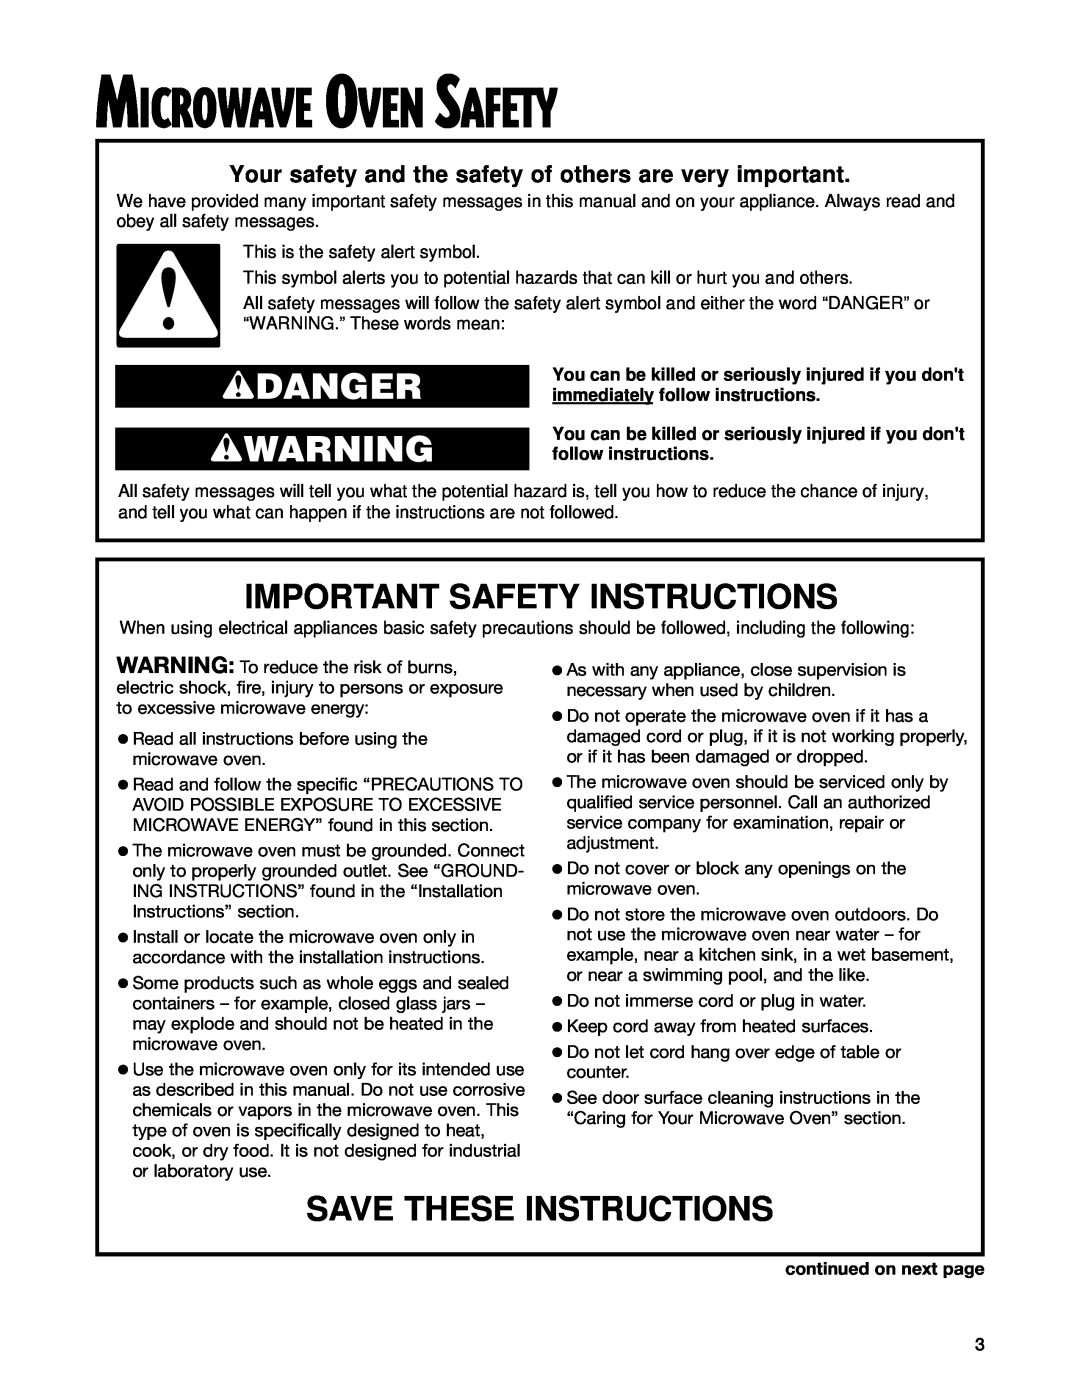 Whirlpool GM8155XJ Microwave Oven Safety, wDANGER wWARNING, Important Safety Instructions, Save These Instructions 